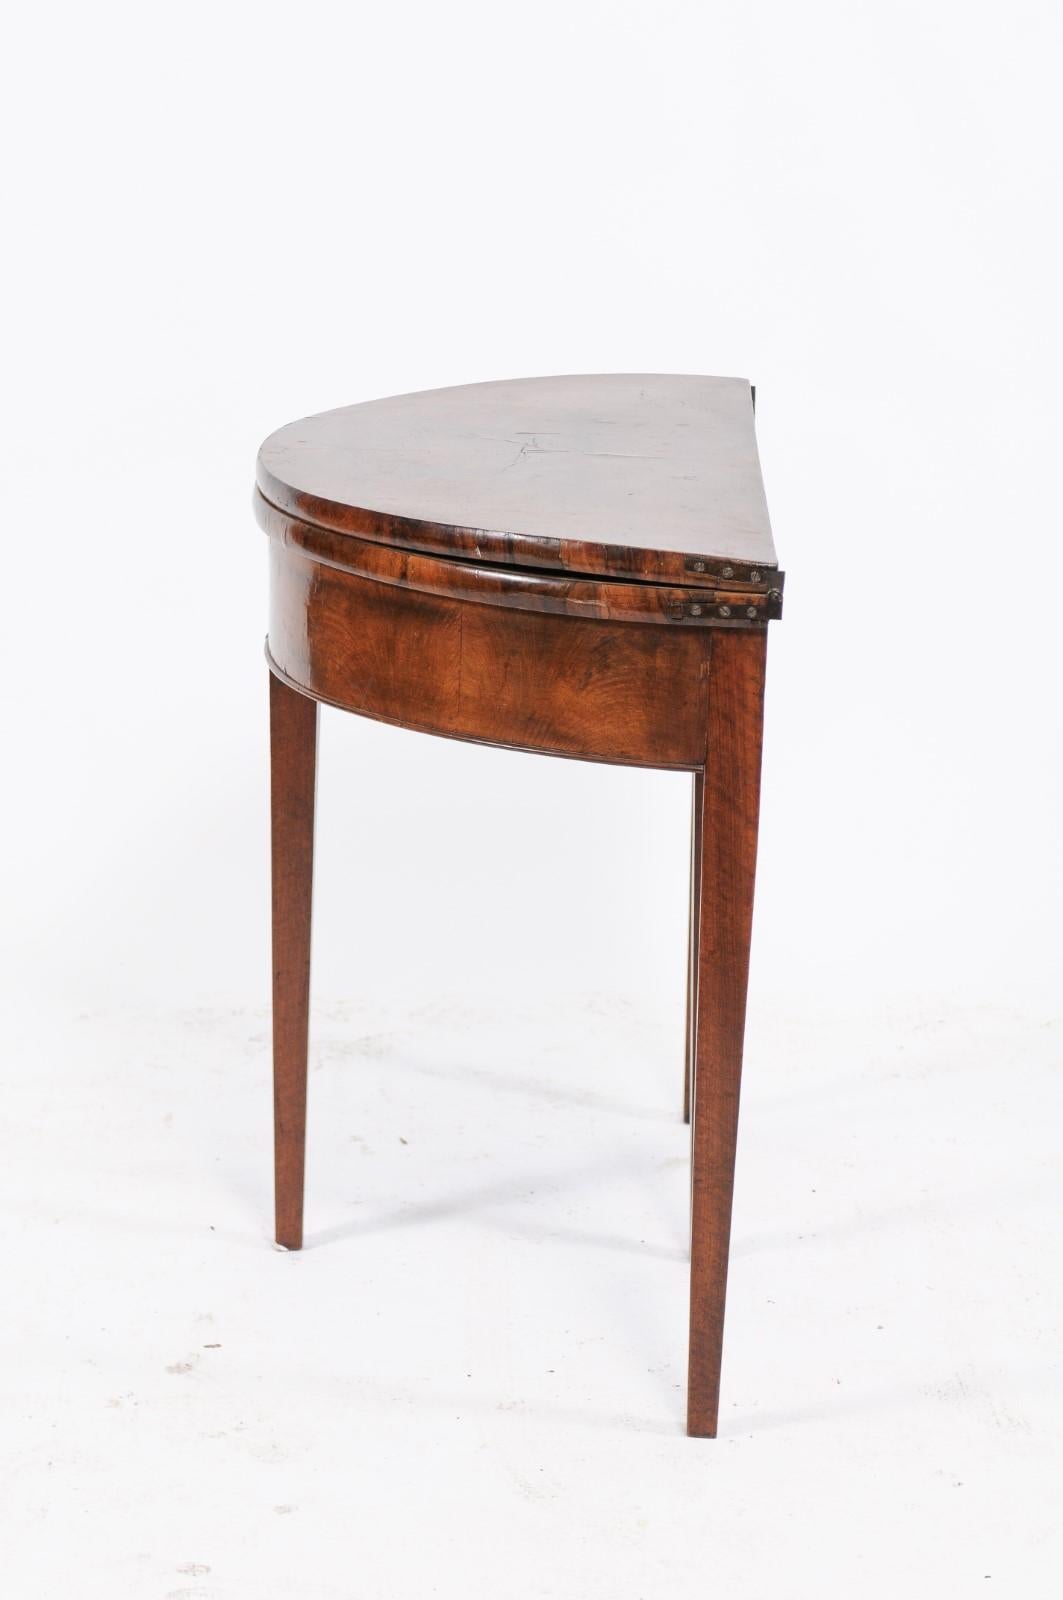 A French Directoire style bookmark walnut veneered demilune console table from the third quarter of the 19th century, with folding top, leather inset and tapered legs. We loved the simple lines and rich patina of this walnut folding demilune console